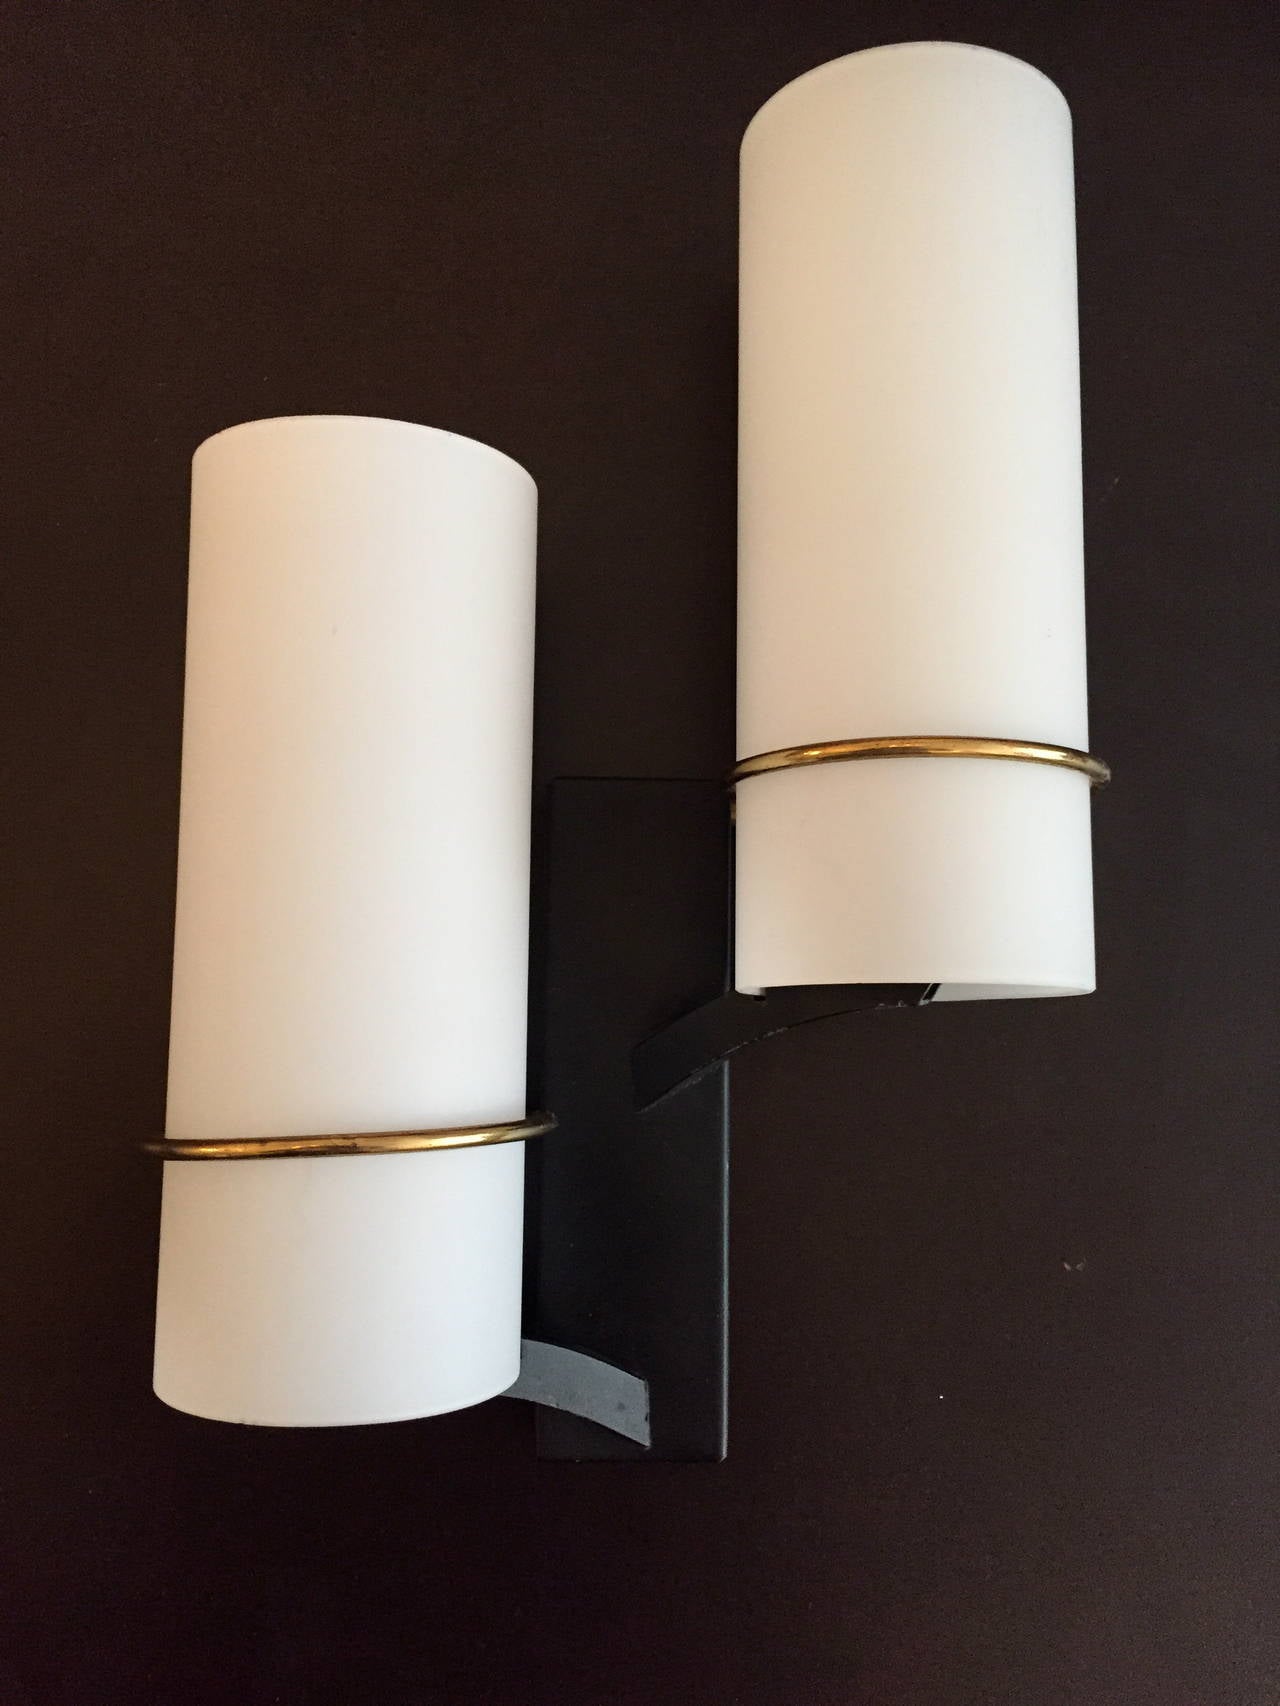 A wonderful pair of 1960s French sconces done in matte black enamel fixtures with polished brass rings holding frosted white glass cylinder shades. Rewired, by Maison Lunel.